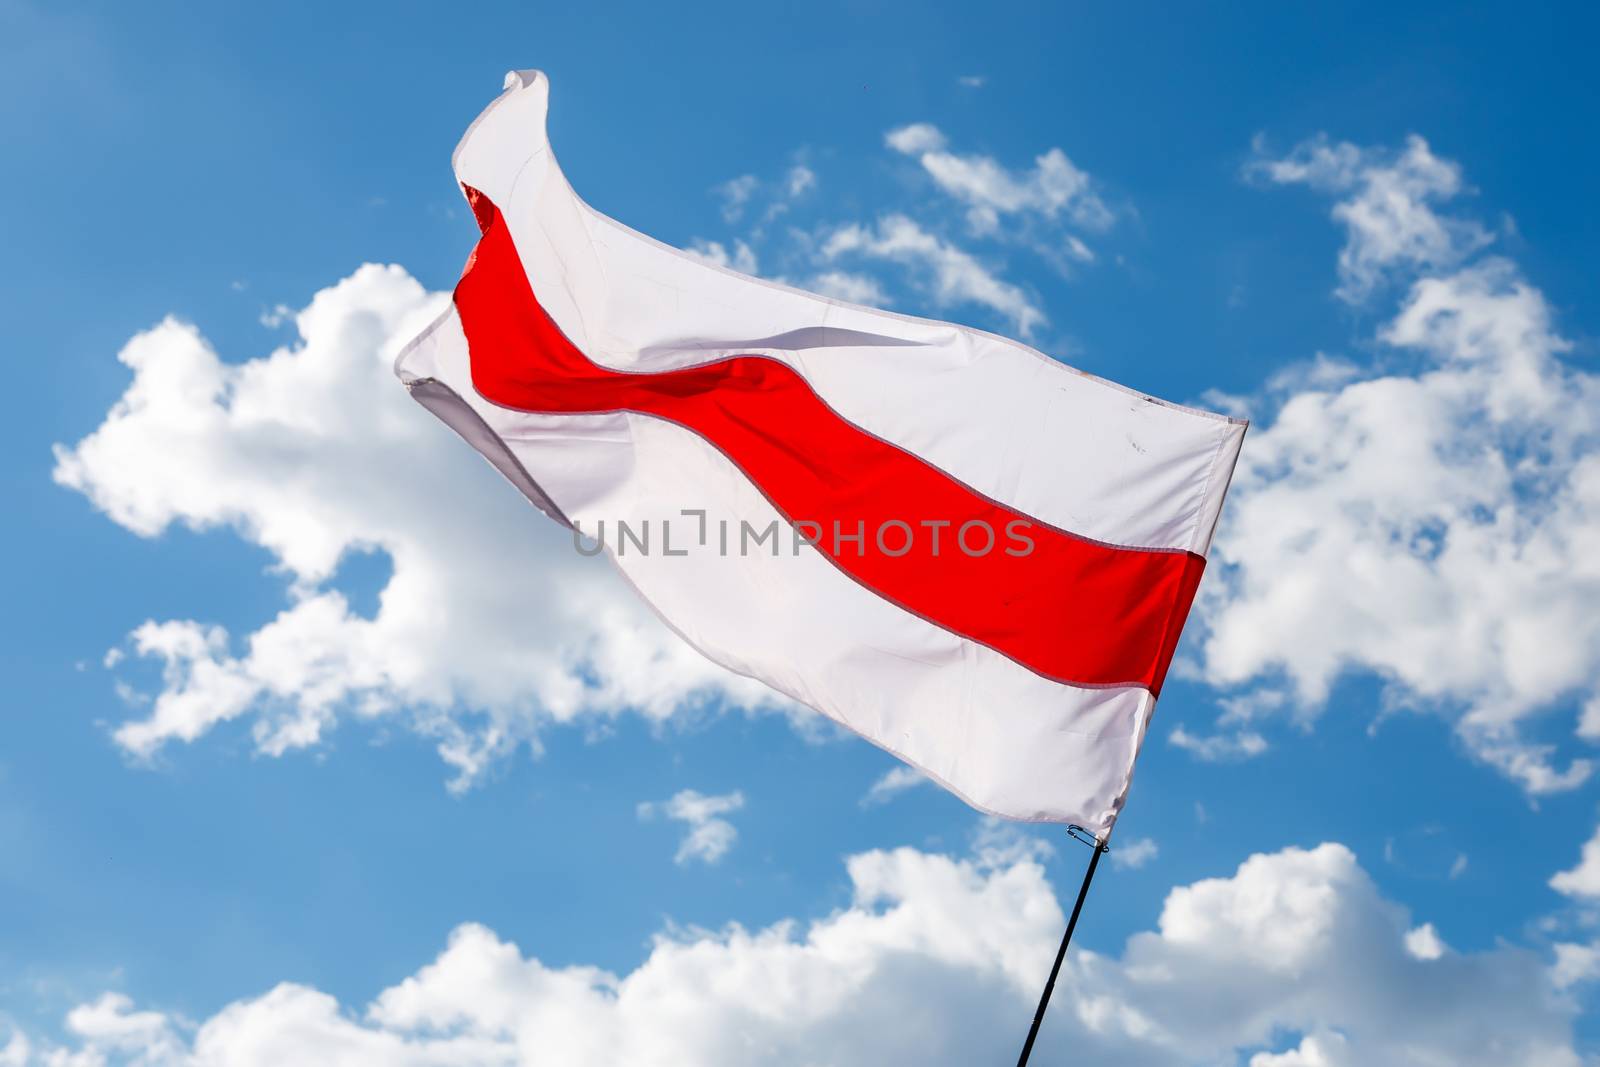 New Belarus white-red-white flag. Protest and historical authentic flag by 9parusnikov